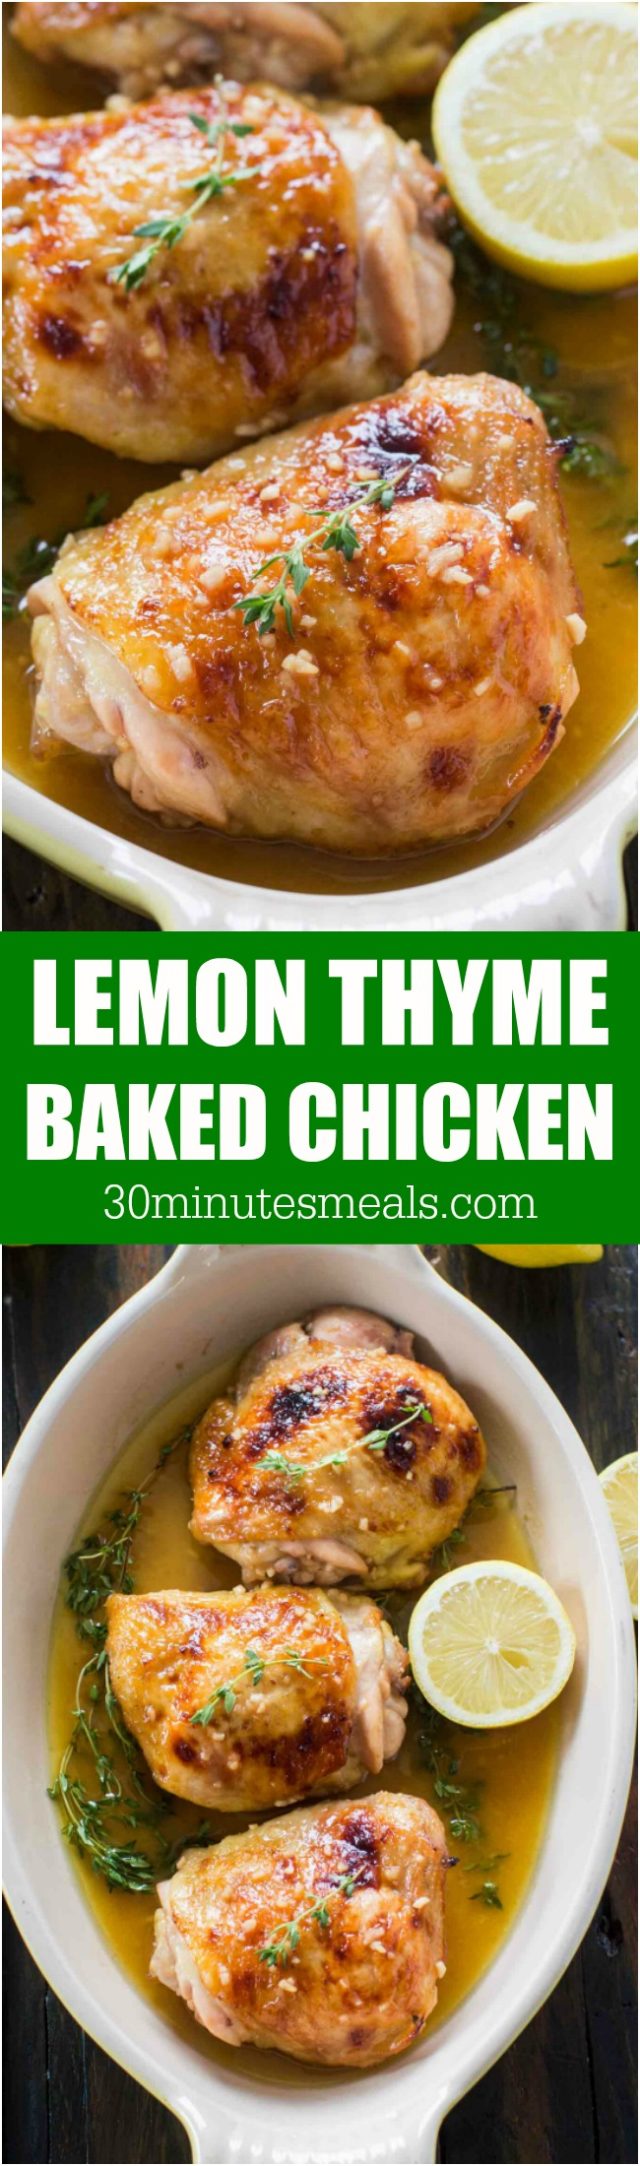 Baked Lemon Thyme Chicken Recipe - 30 minutes meals